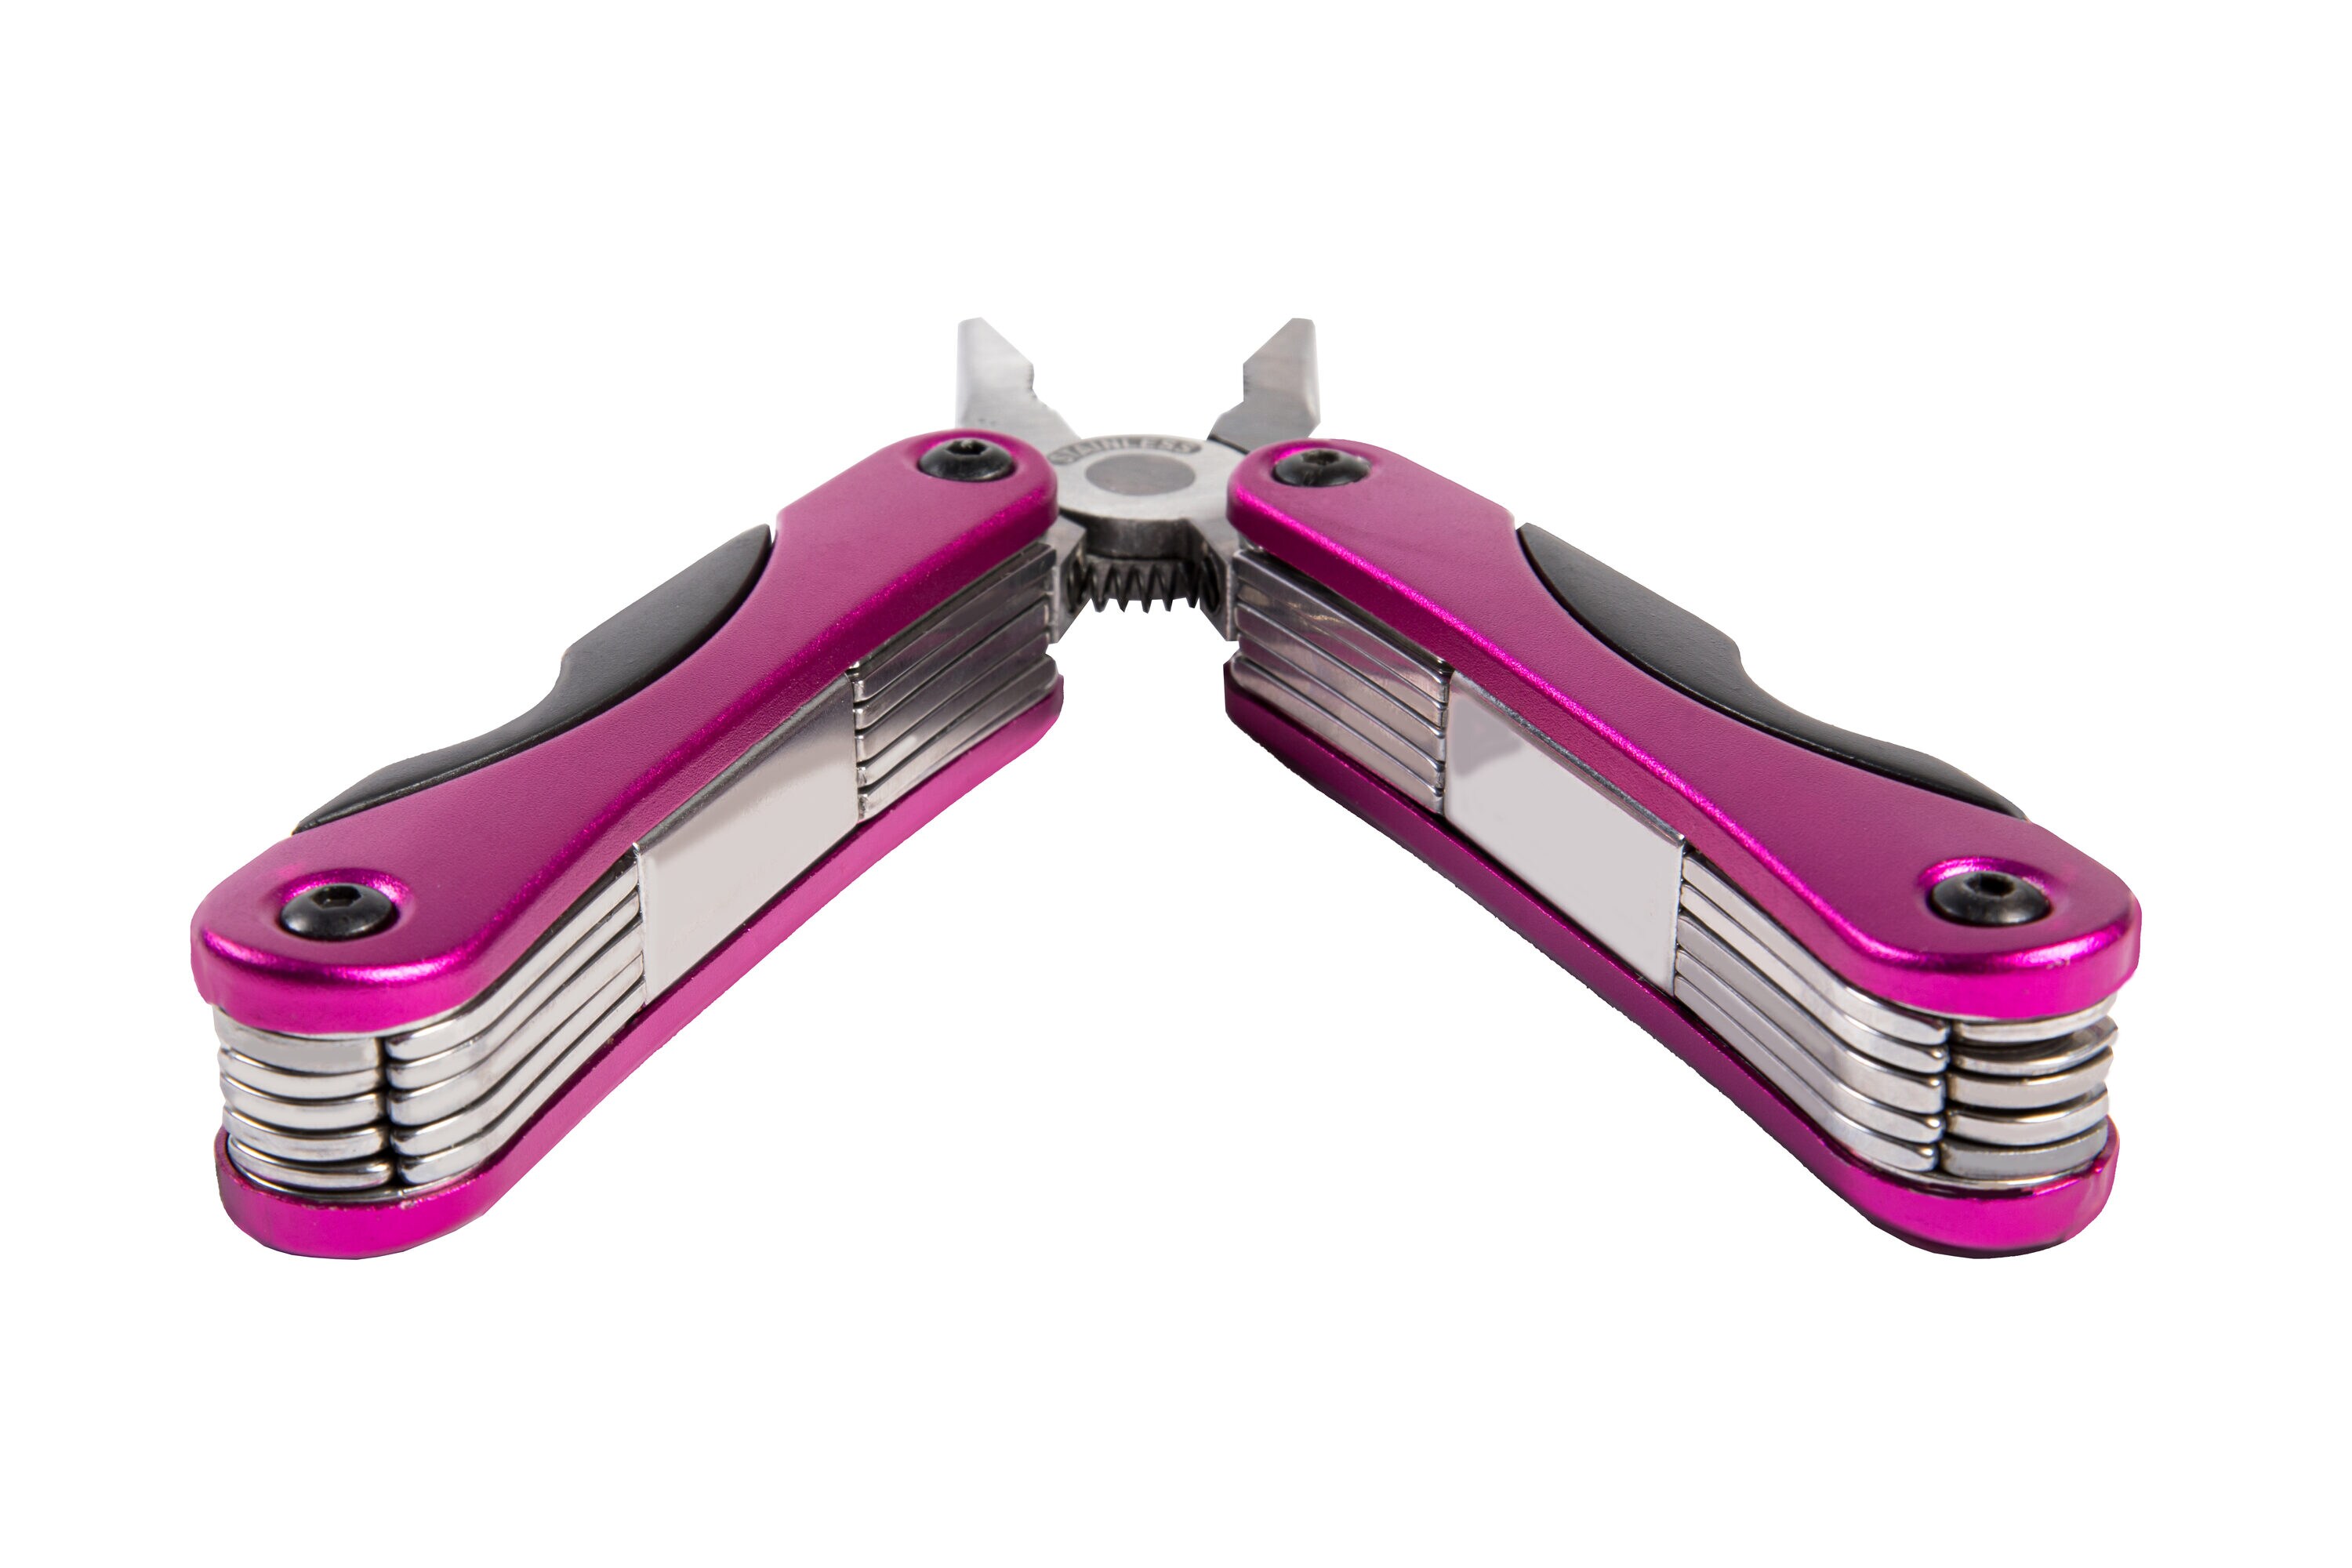 The Original Pink Box 14-in-1 Folding Multi-Tool, Aluminum Body, Pink,  Lightweight and Portable in the Multi-Tools department at